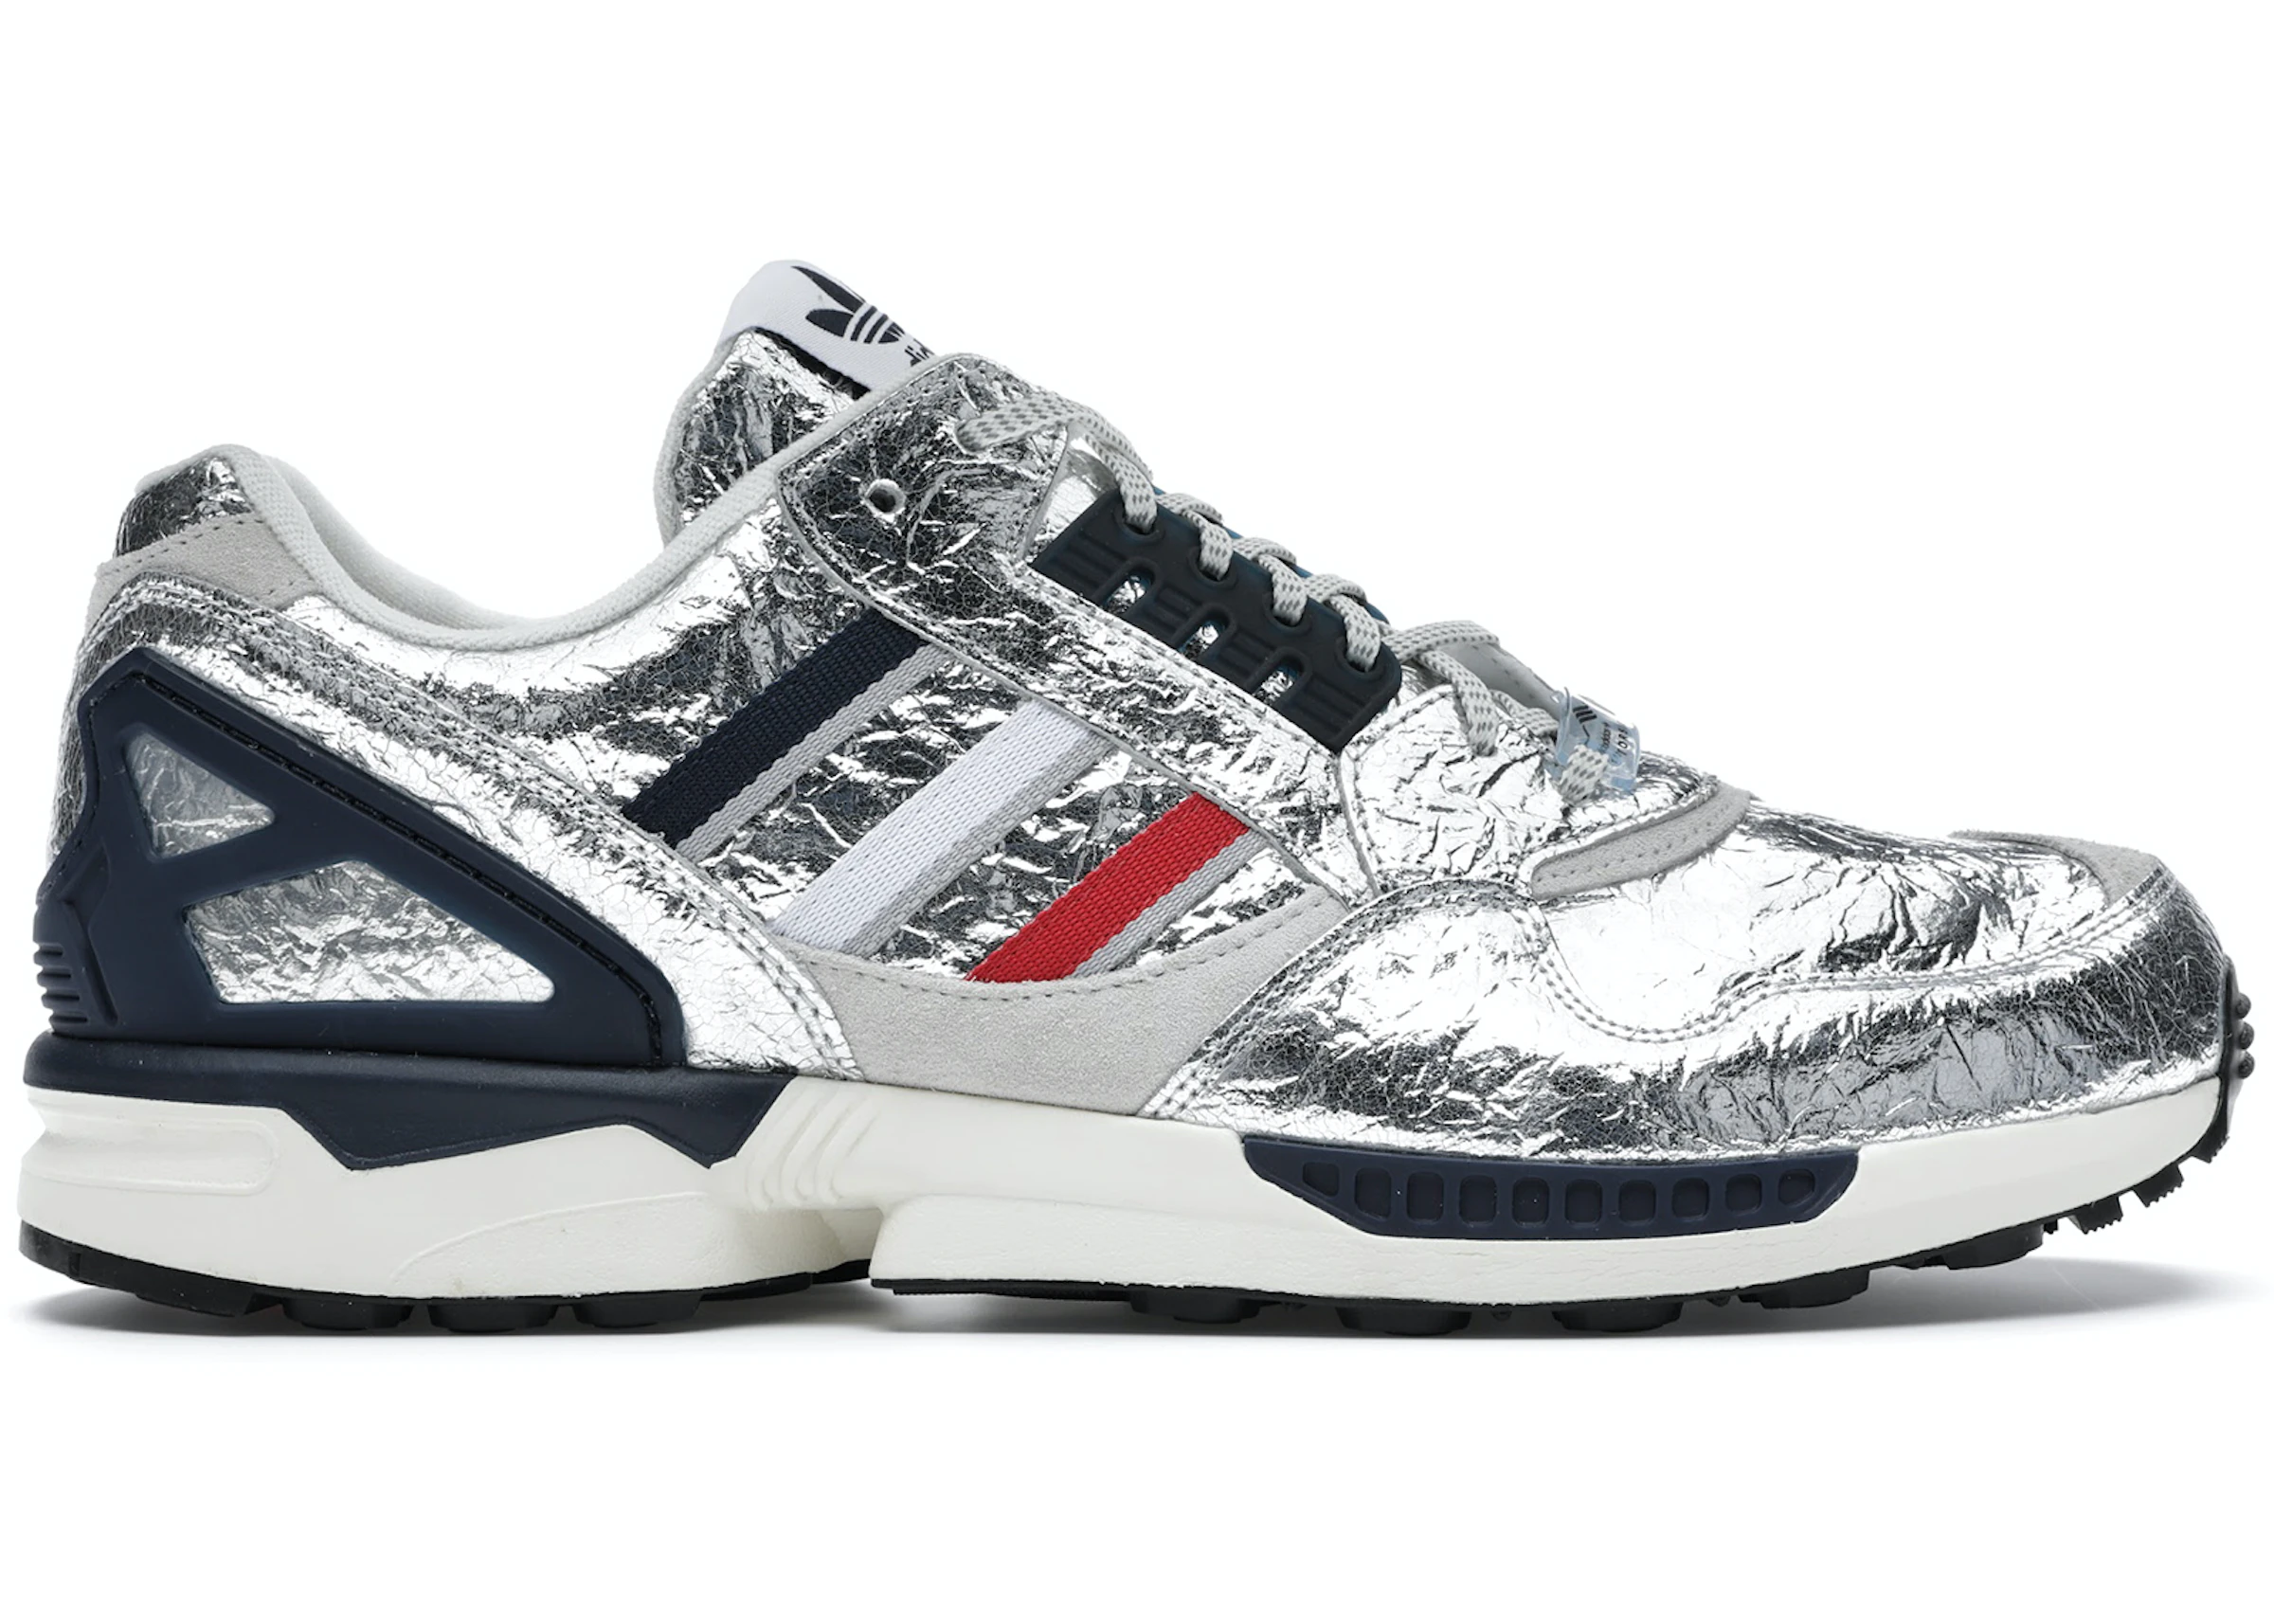 Wreck Umeki look for adidas ZX 9000 Concepts - FX9966 - US